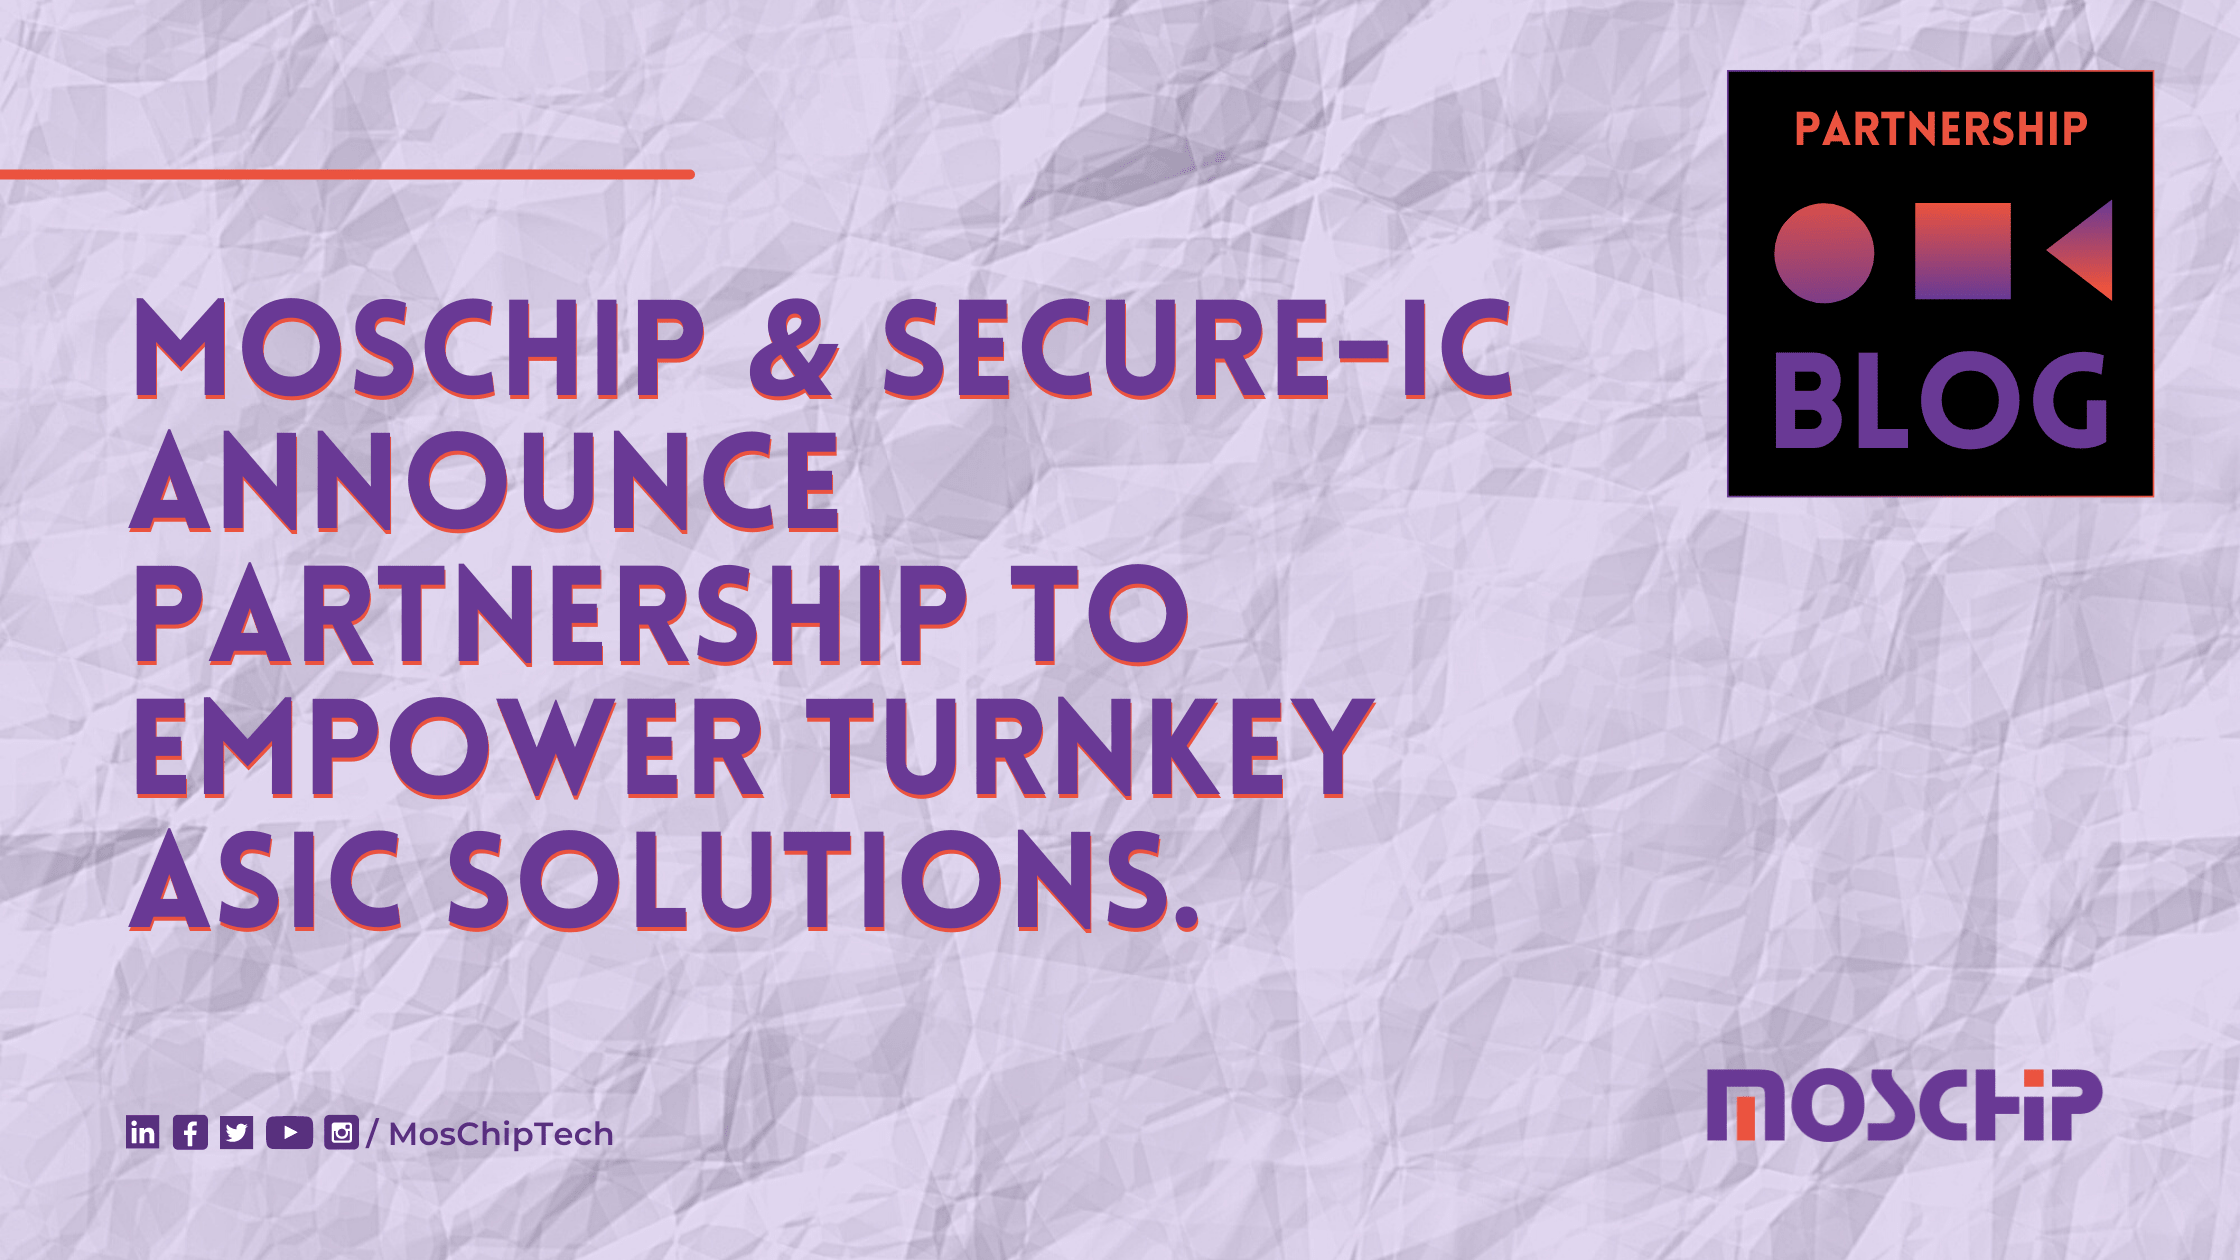 MosChip & Secure-IC Announce Partnership To empower turnkey ASIC solutions_Blog